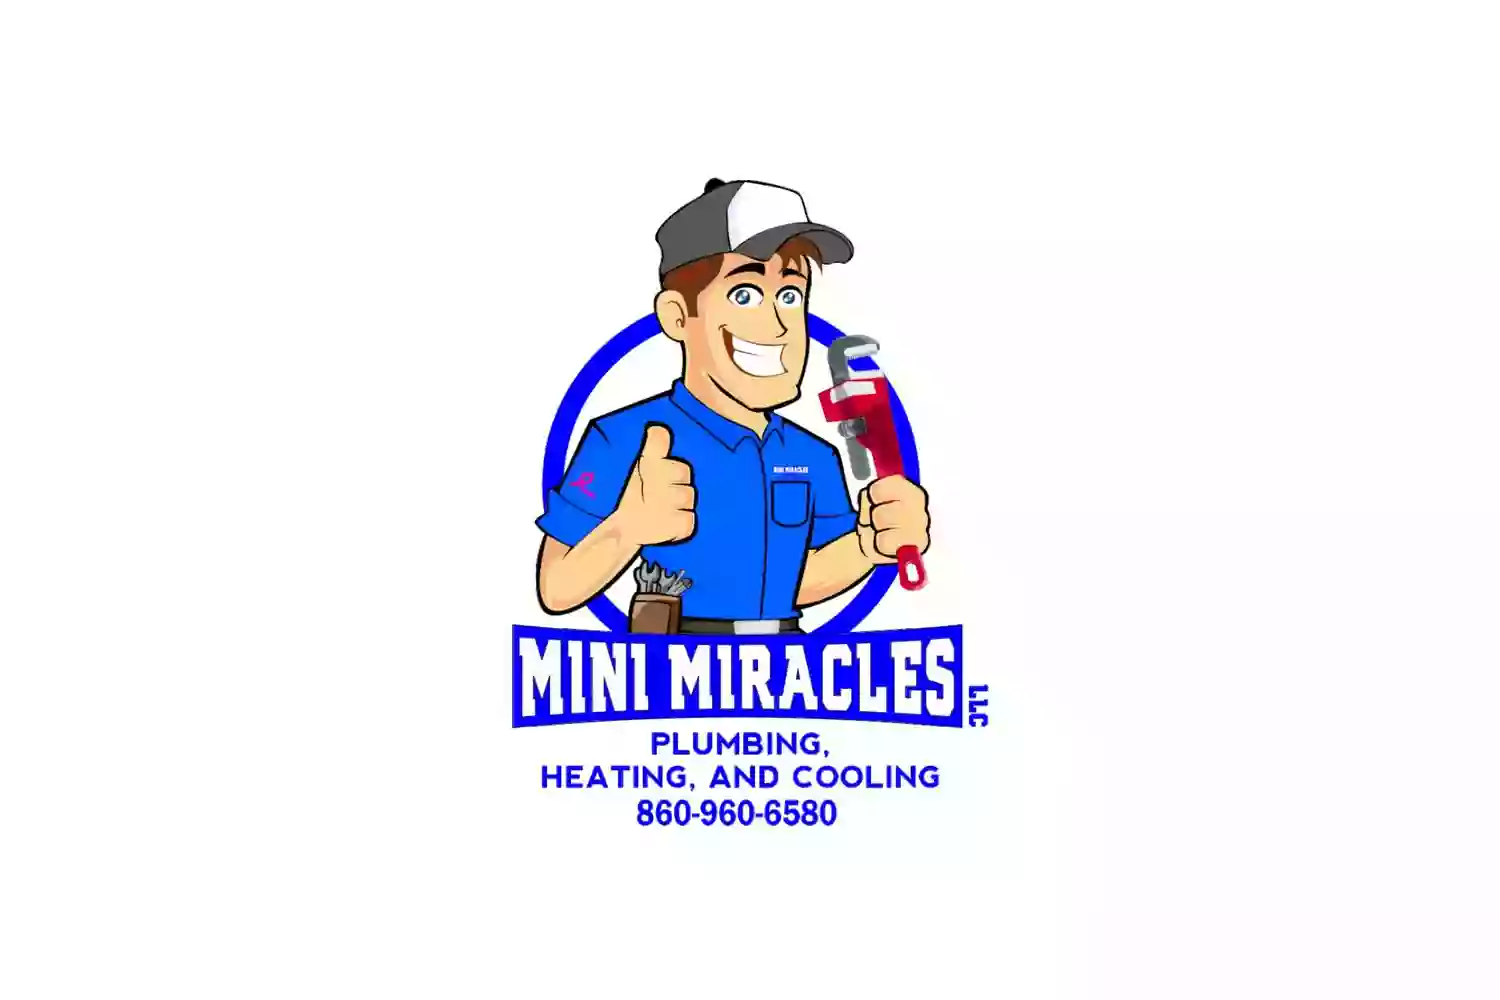 Mini Miracles LLC Plumbing, Heating, and Cooling